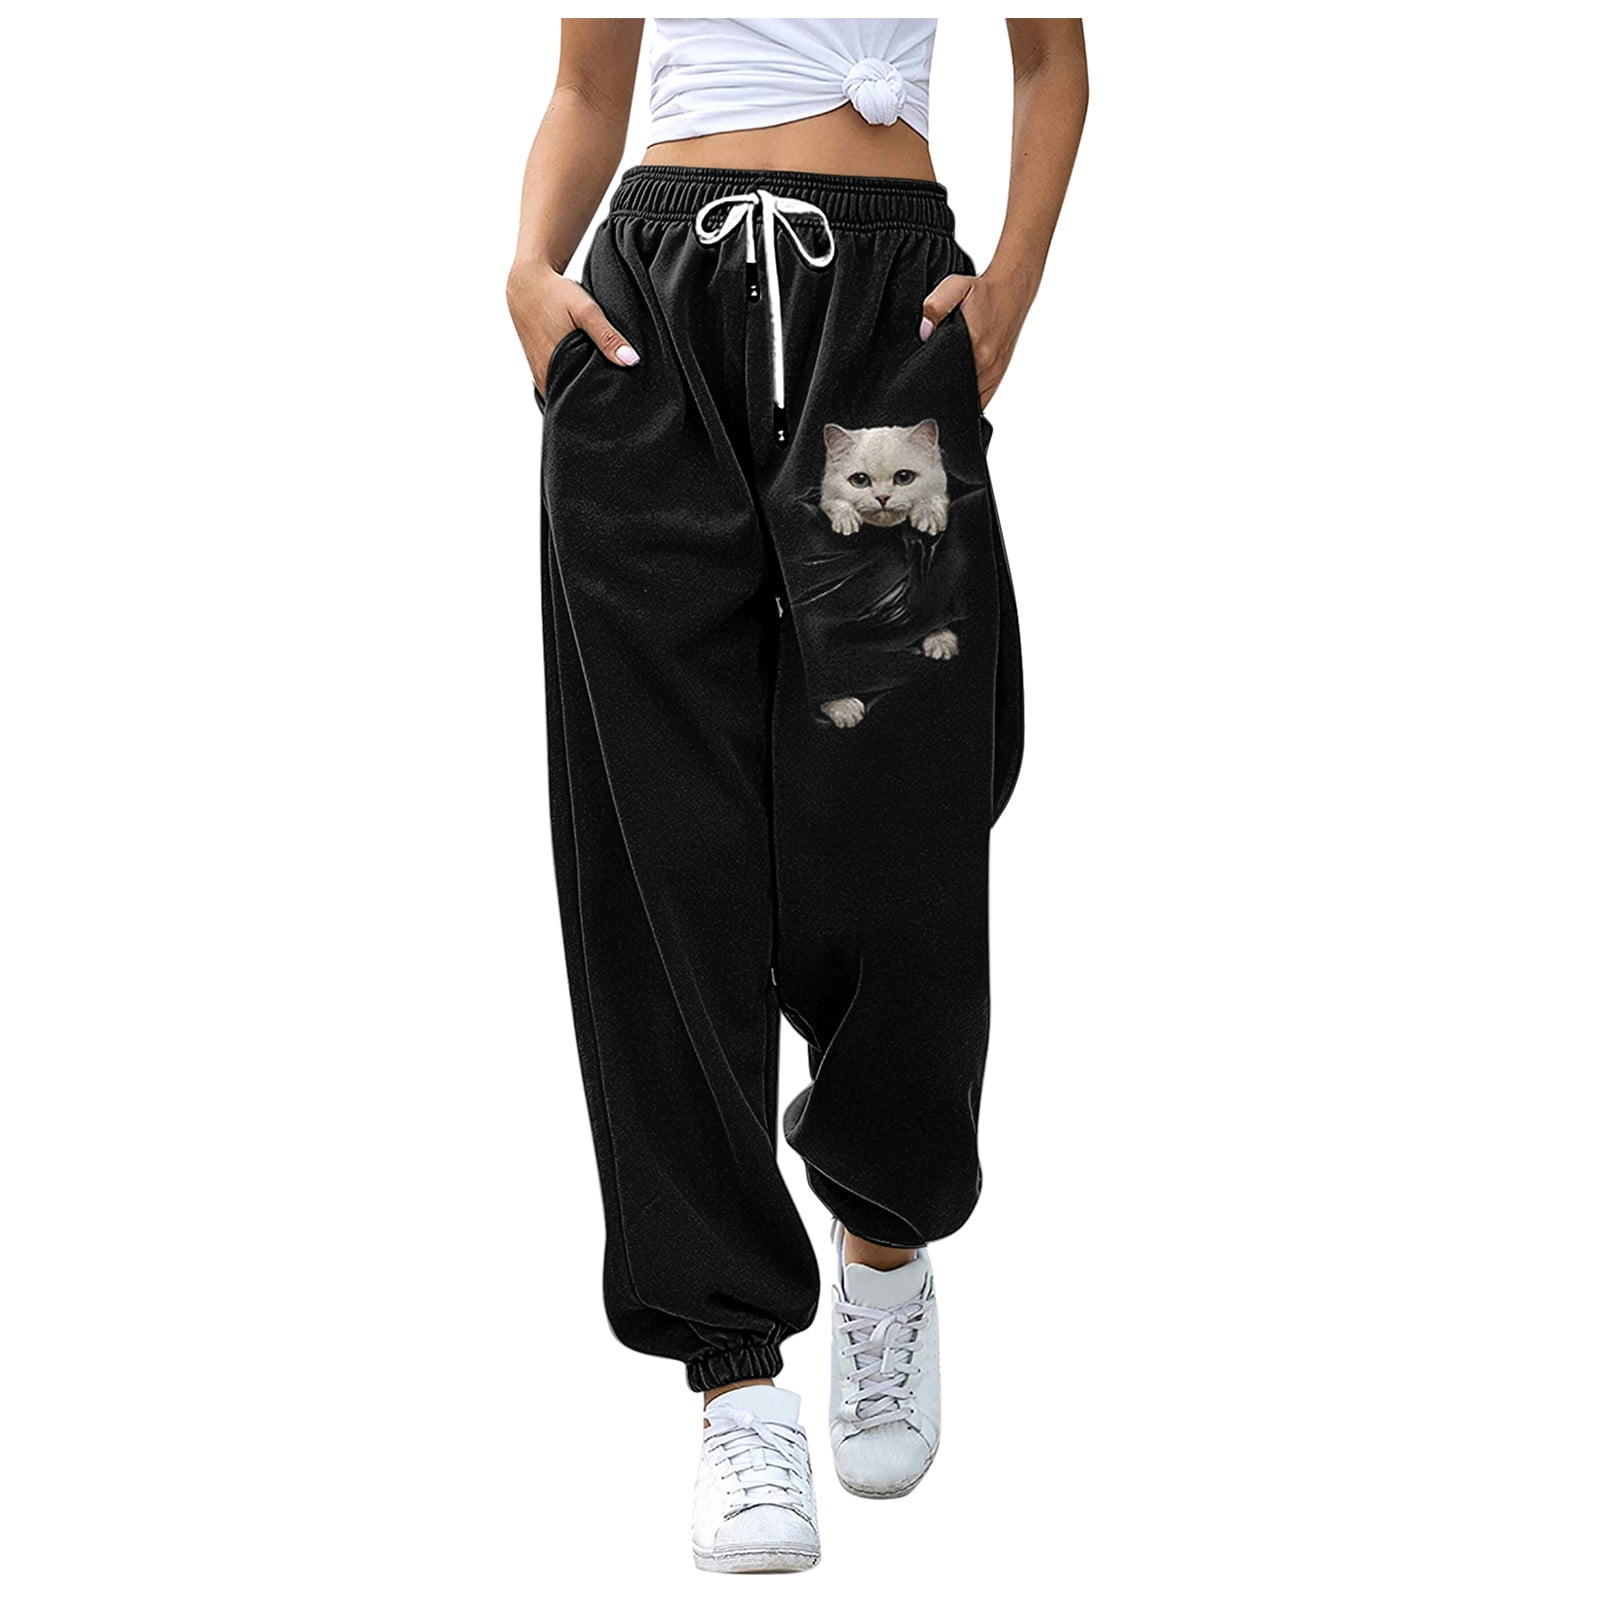 Denmark Meaningless Relationship Women's Animal Print Bottom Sweatpants Pockets High Waist Sporty Gym  Athletic Fit Jogger Pants Lounge Trousers Note Please Buy One Or Two Sizes  Larger - Walmart.com